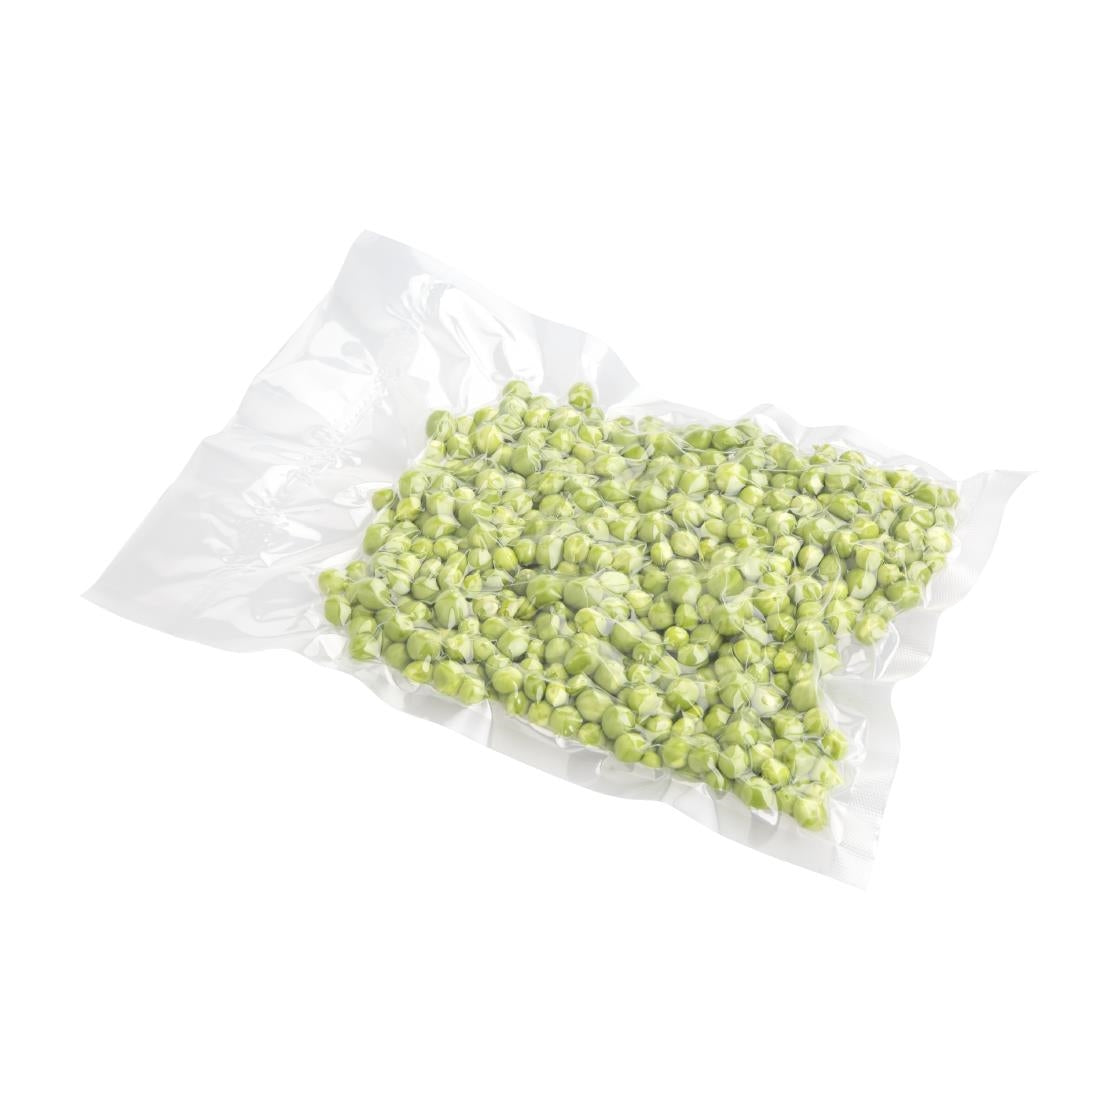 CL199 Vogue Vacuum Flat Bags 300mm x 350mm (Pack of 100) JD Catering Equipment Solutions Ltd